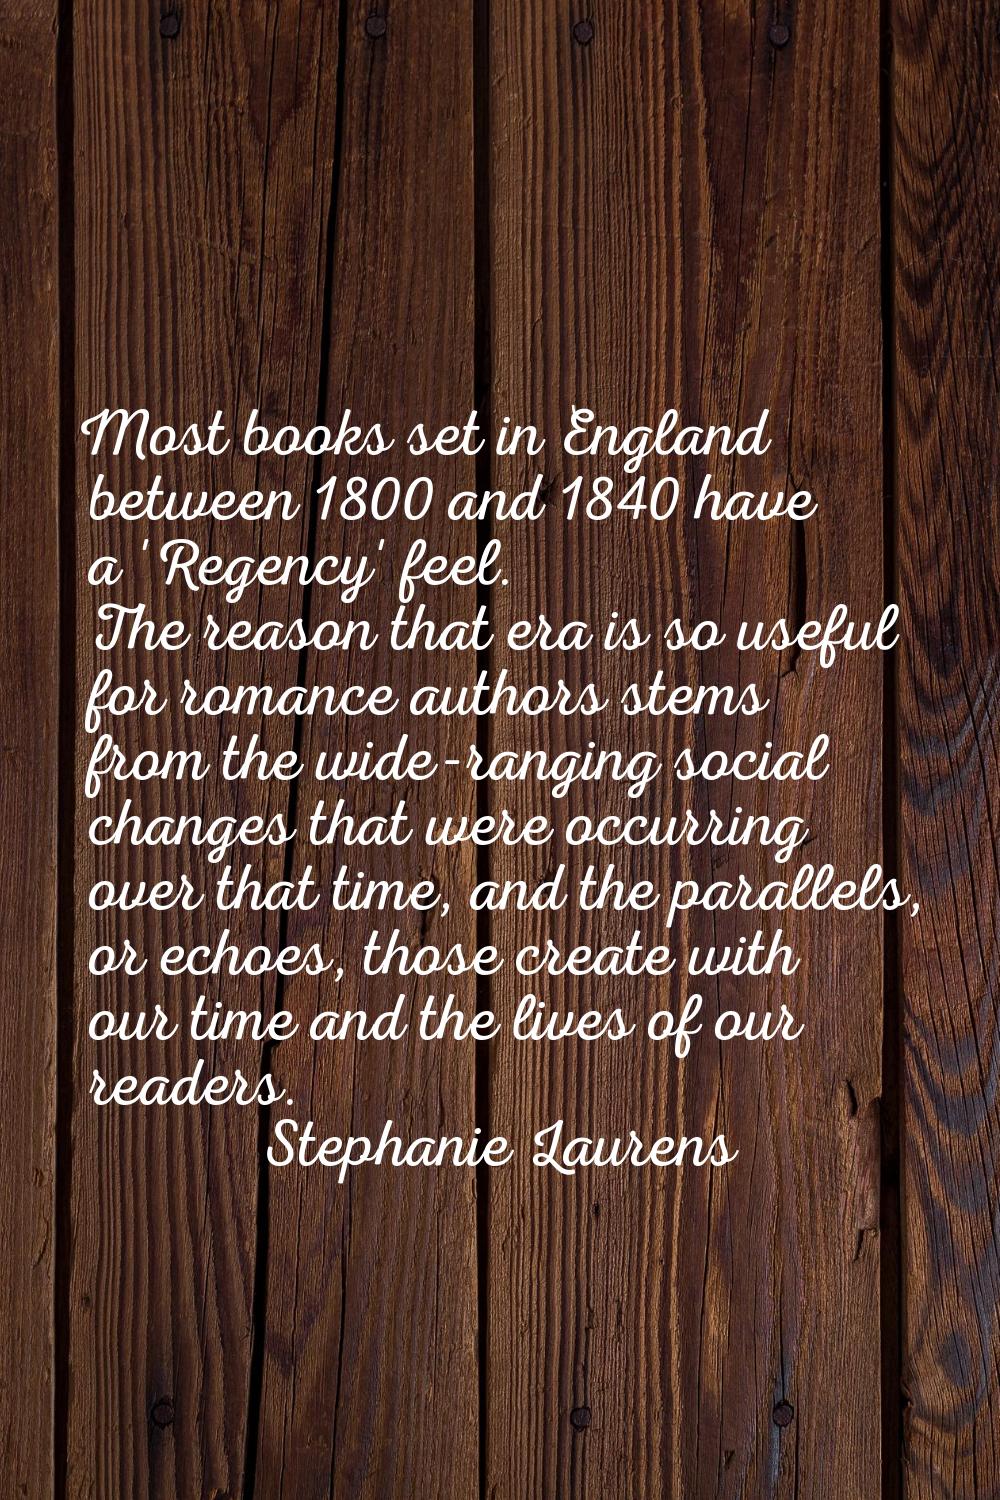 Most books set in England between 1800 and 1840 have a 'Regency' feel. The reason that era is so us